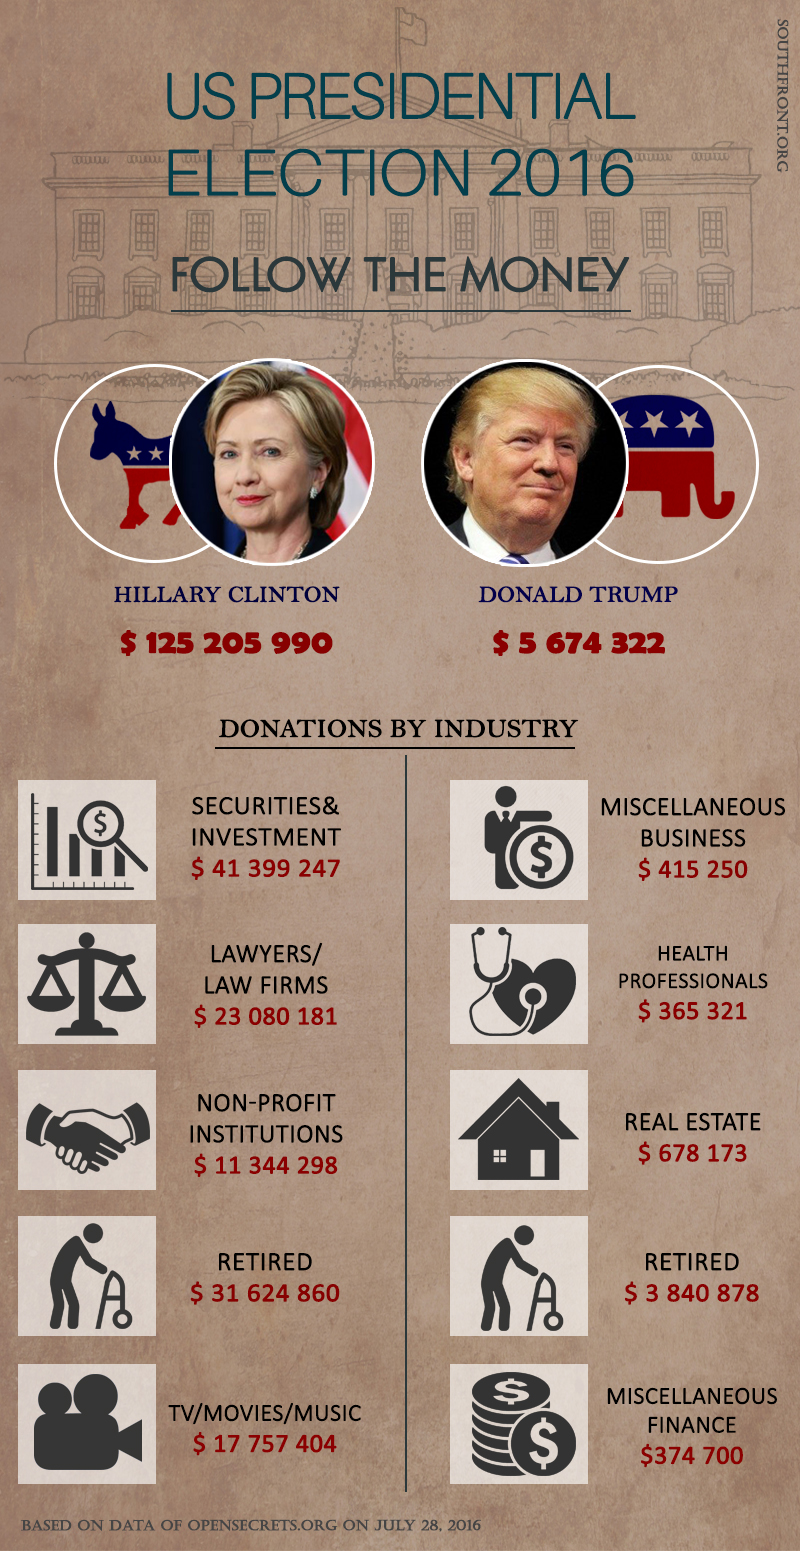 Follow the Money: What Industries Support US Presidential Candidates?